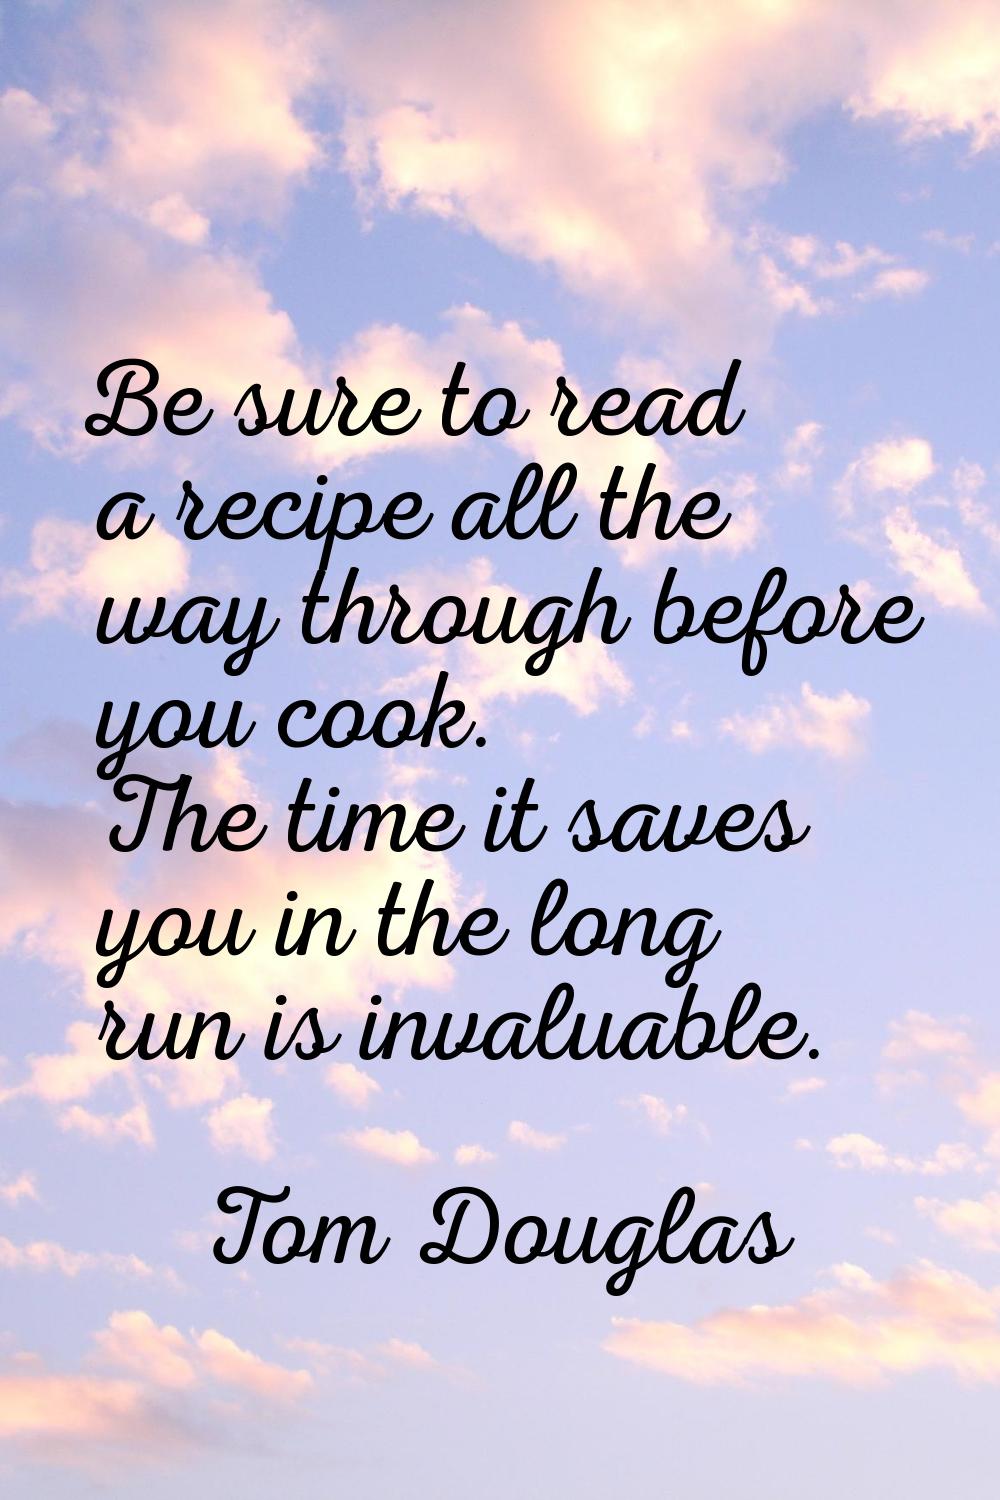 Be sure to read a recipe all the way through before you cook. The time it saves you in the long run